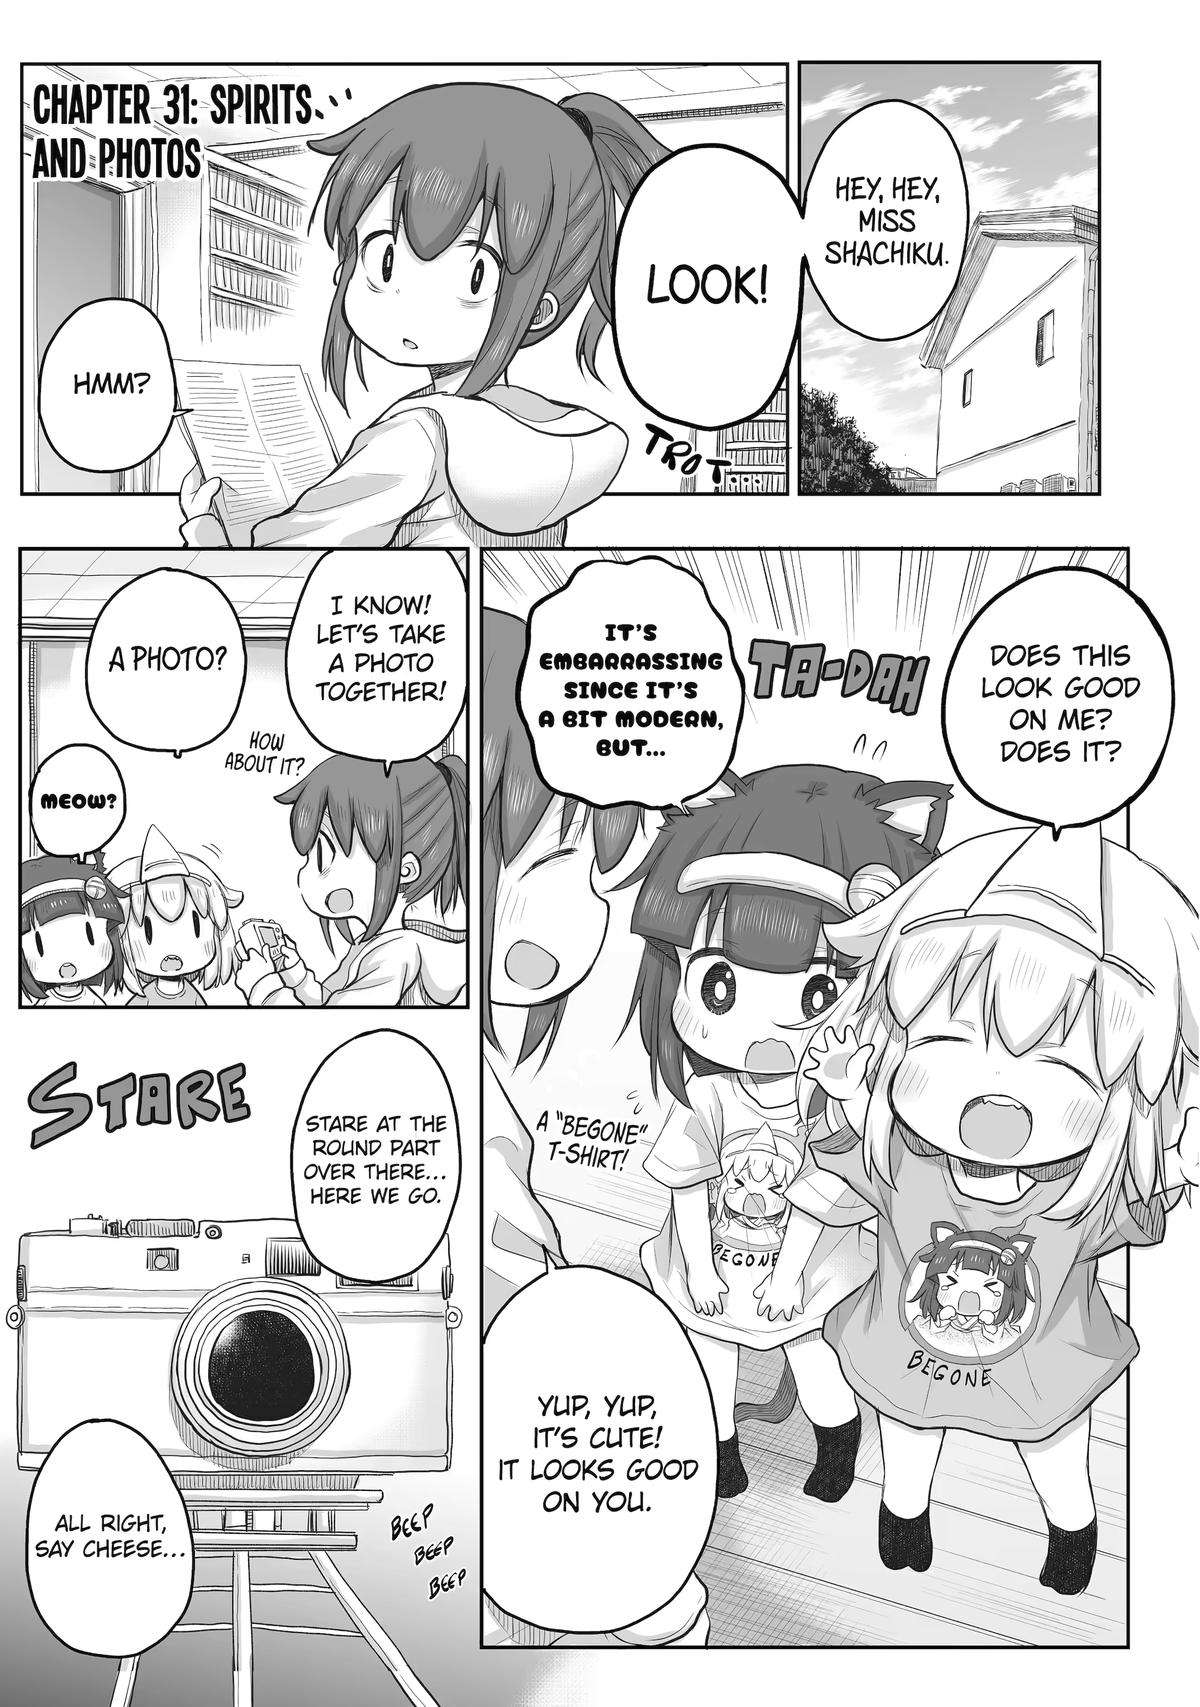 Miss Shachiku and the Little Baby Ghost - chapter 31 - #1